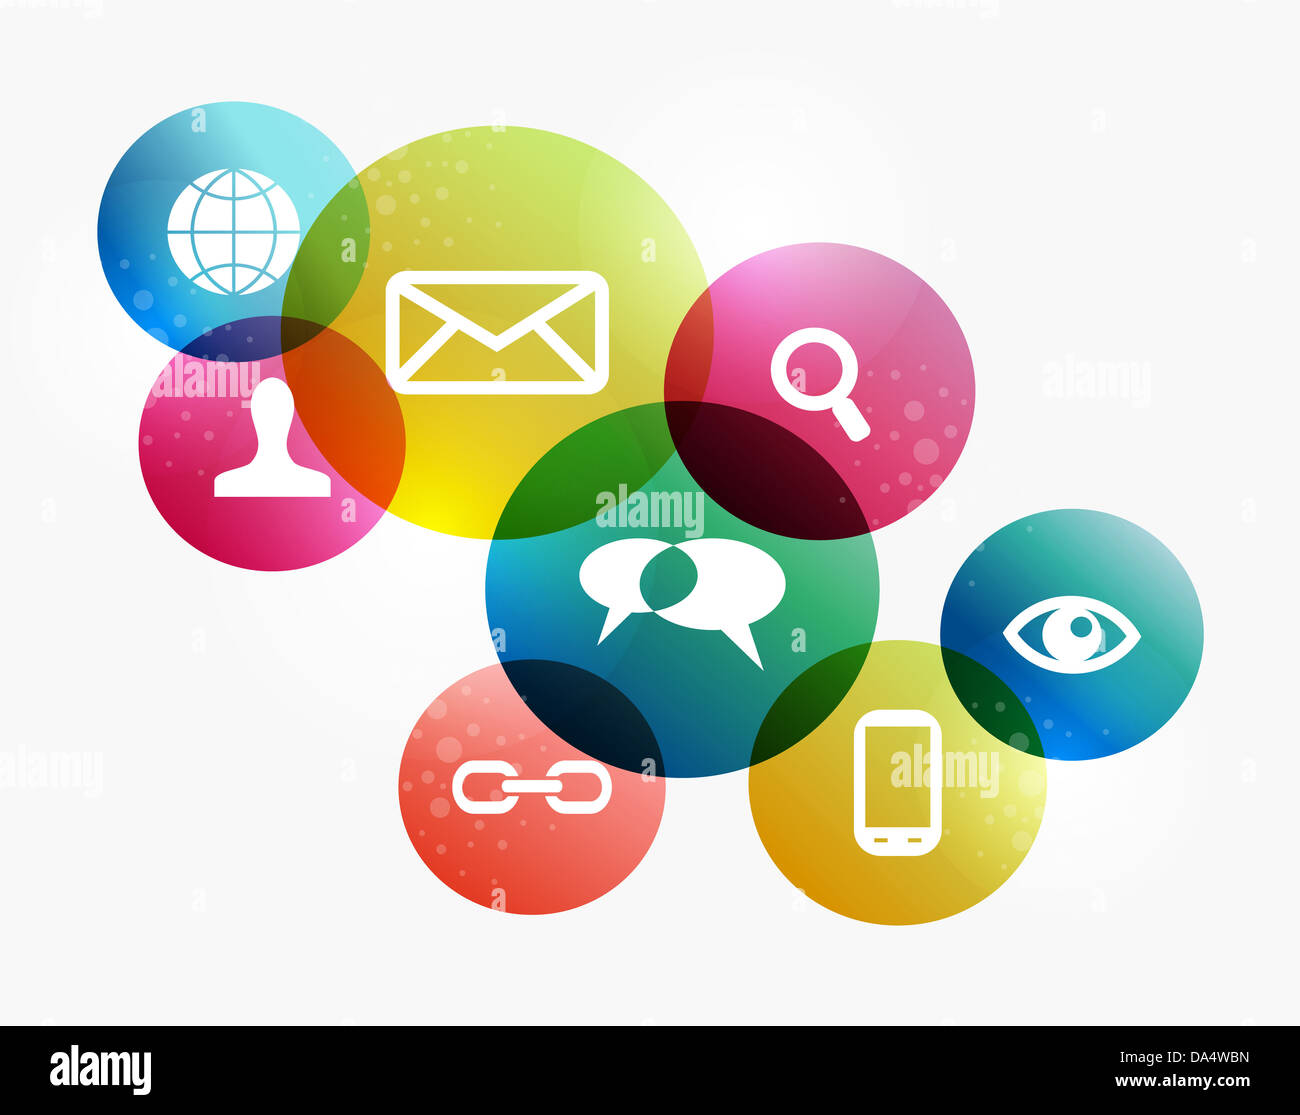 Social media icons set in colorful circle layout. EPS10 file version. Stock Photo